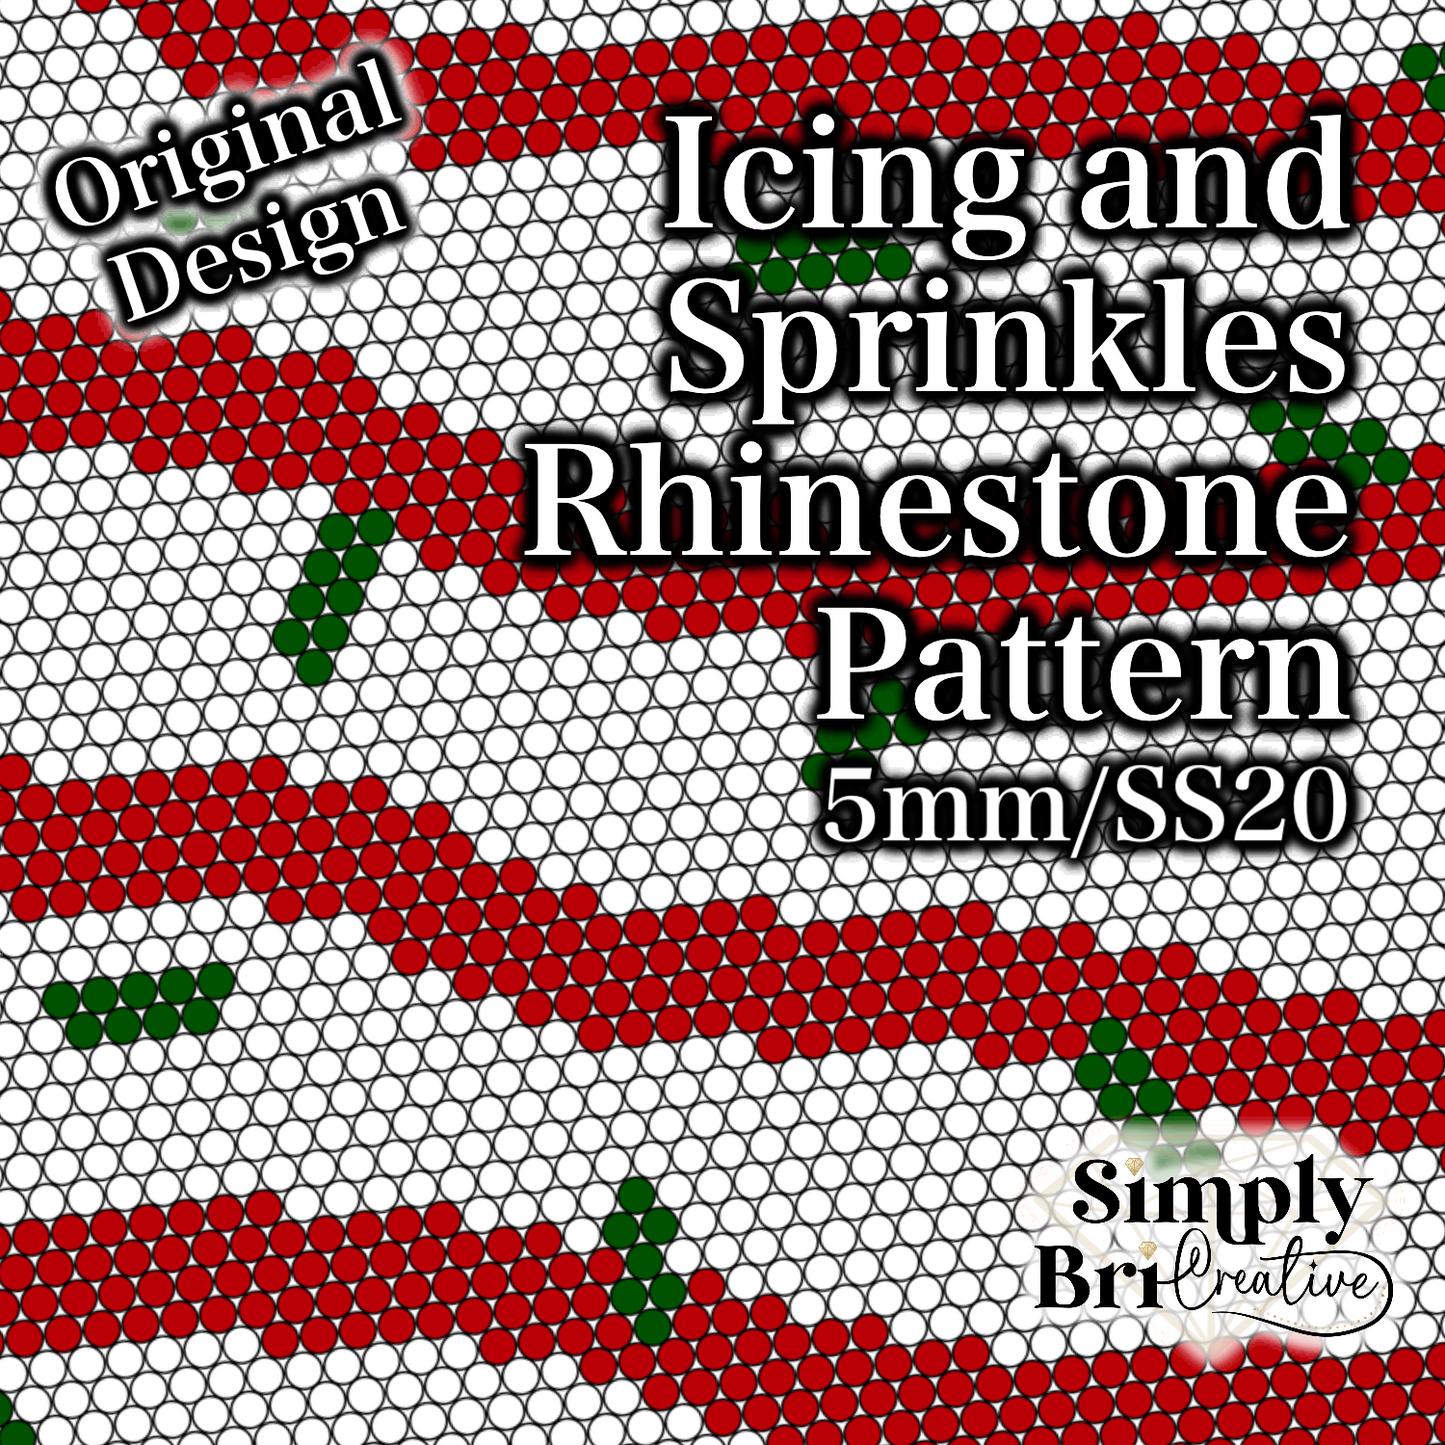 Icing and Sprinkles Rhinestone Pattern (5mm/SS20)